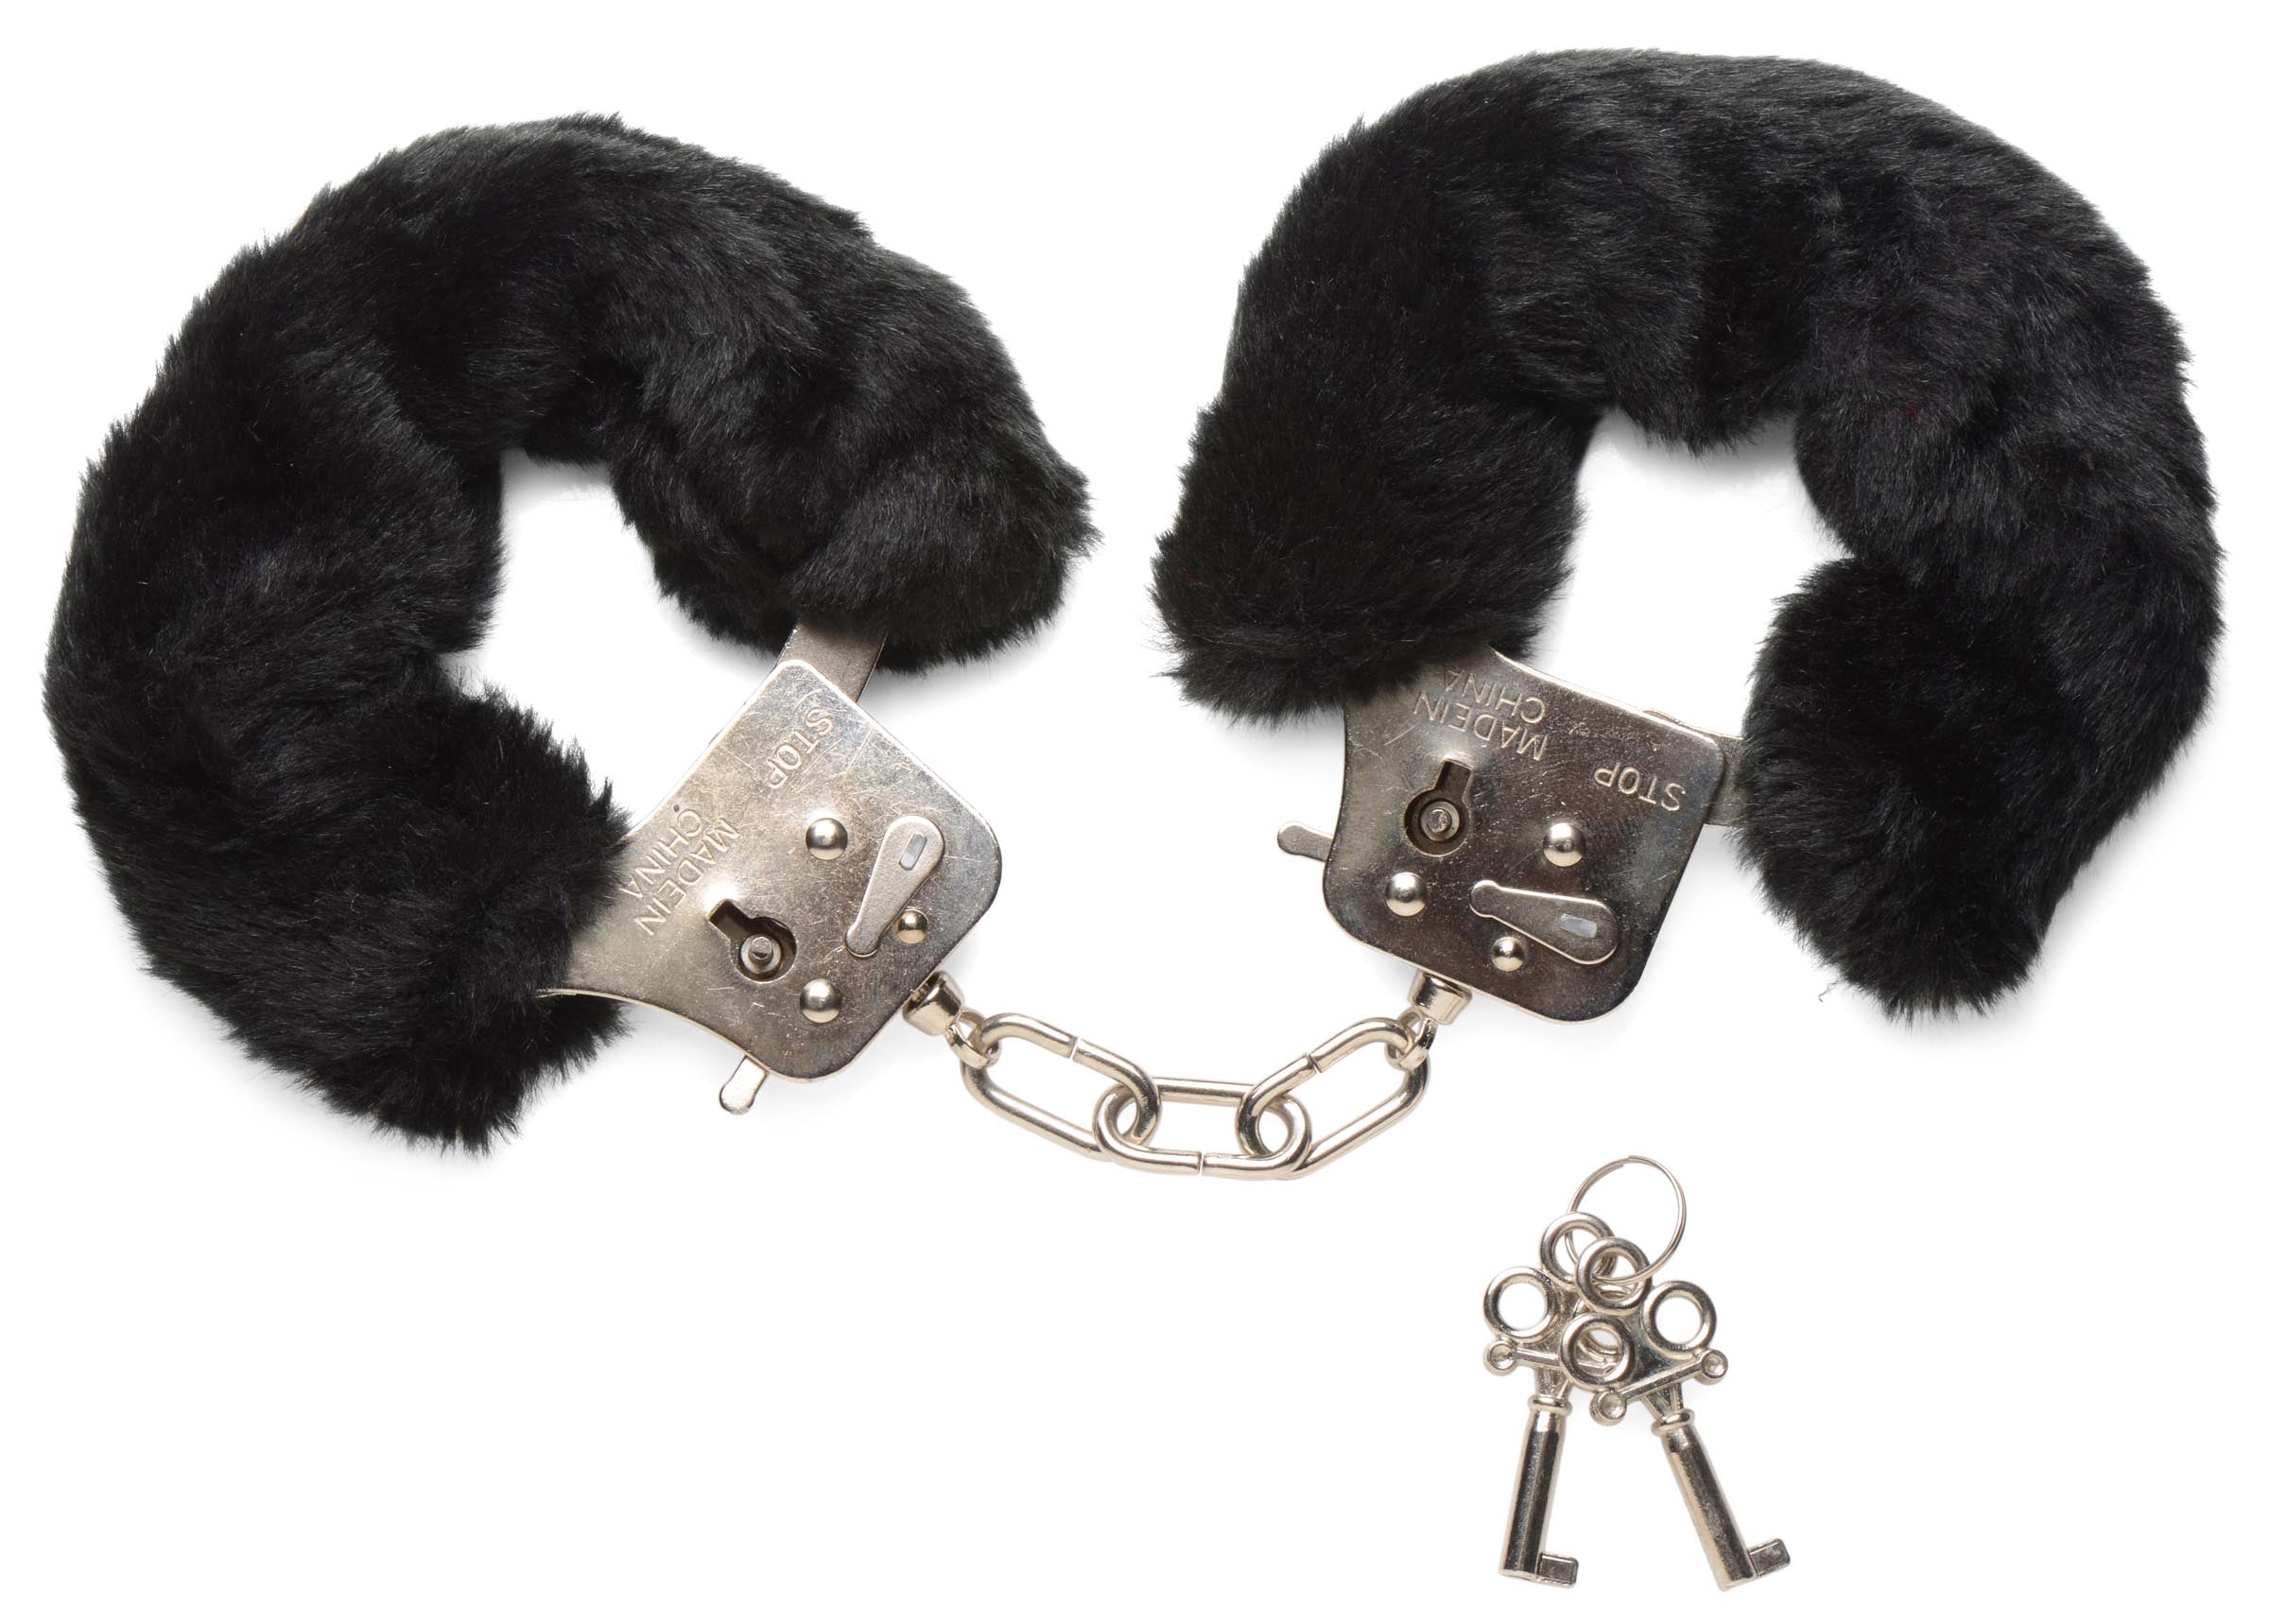 Caught in Candy Handcuffs - Black